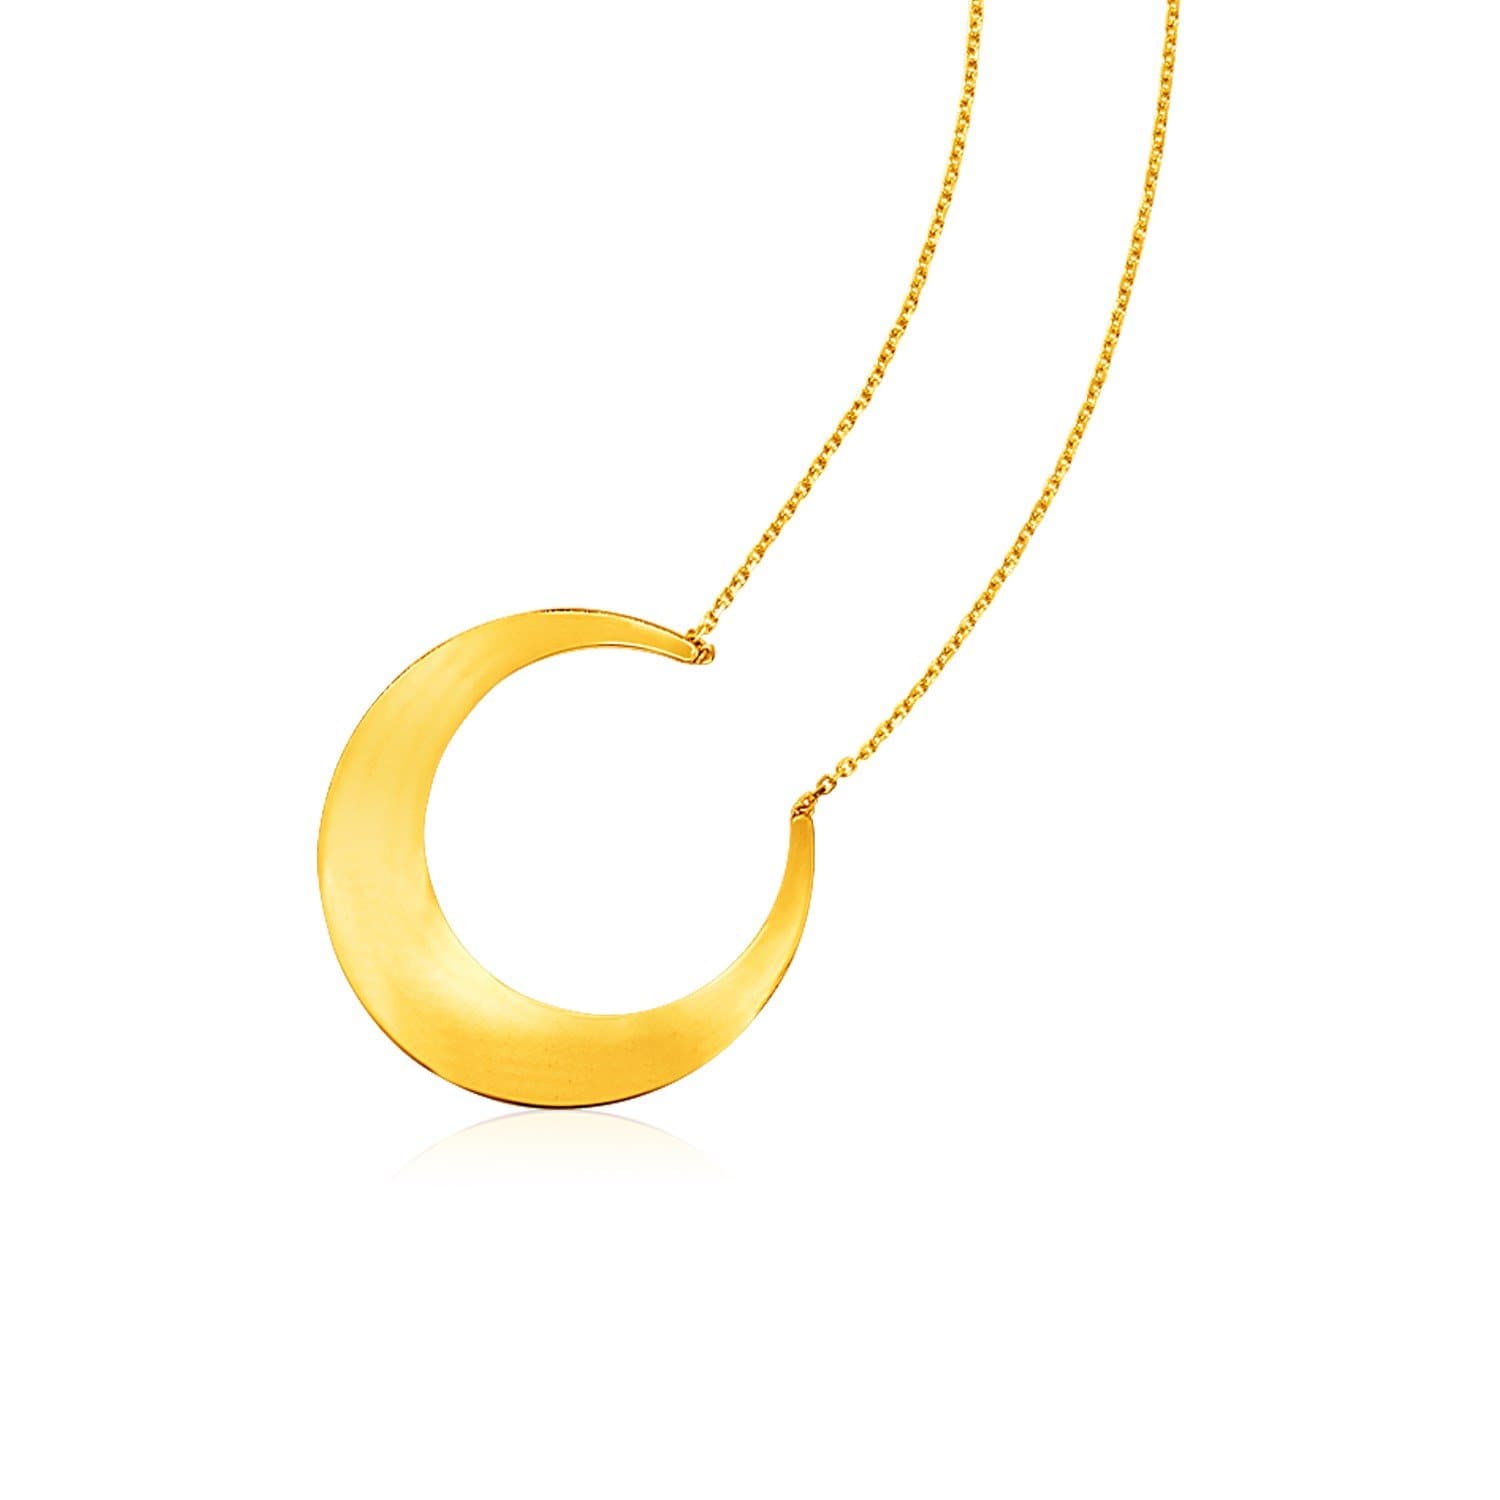 14k Yellow Gold 18 inch Necklace with Polished Moon Motif